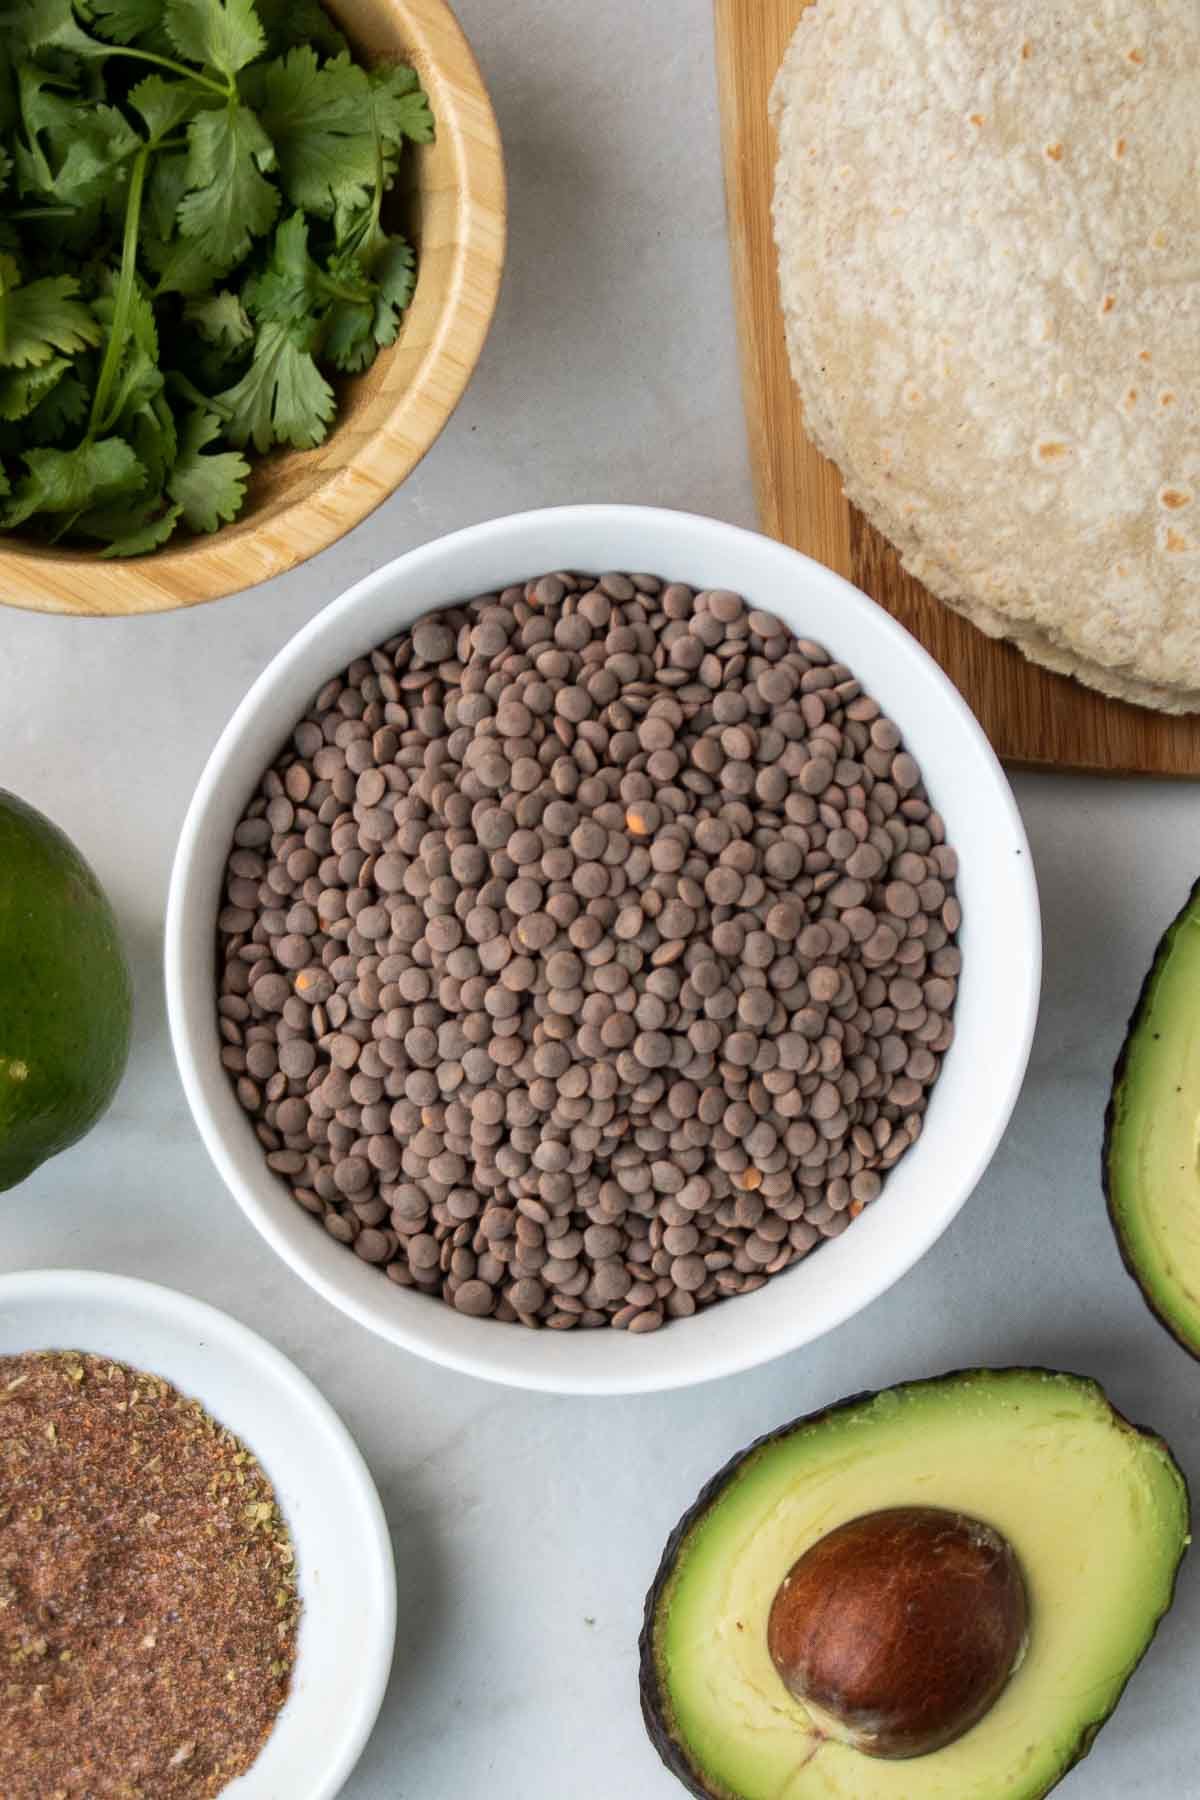 Ingredients for lentil taco meat: brown lentils, homemade taco seasoning, tortillas, avocado, limes, and cilantro.